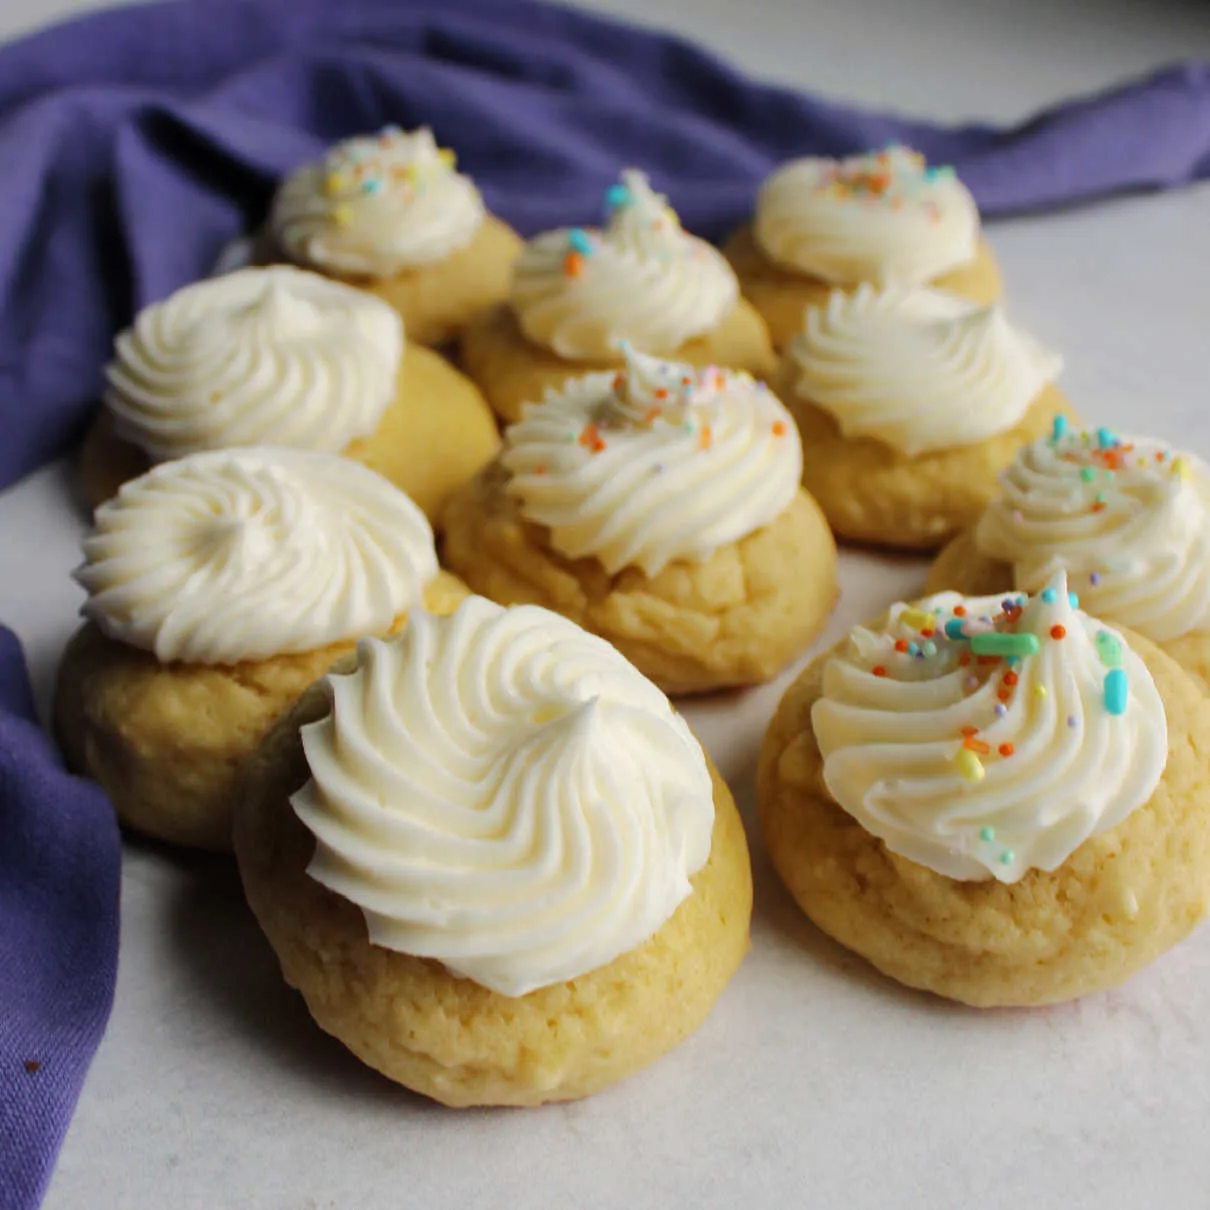 Soft and thick sour cream cookies topped with swirls of buttercream on top.